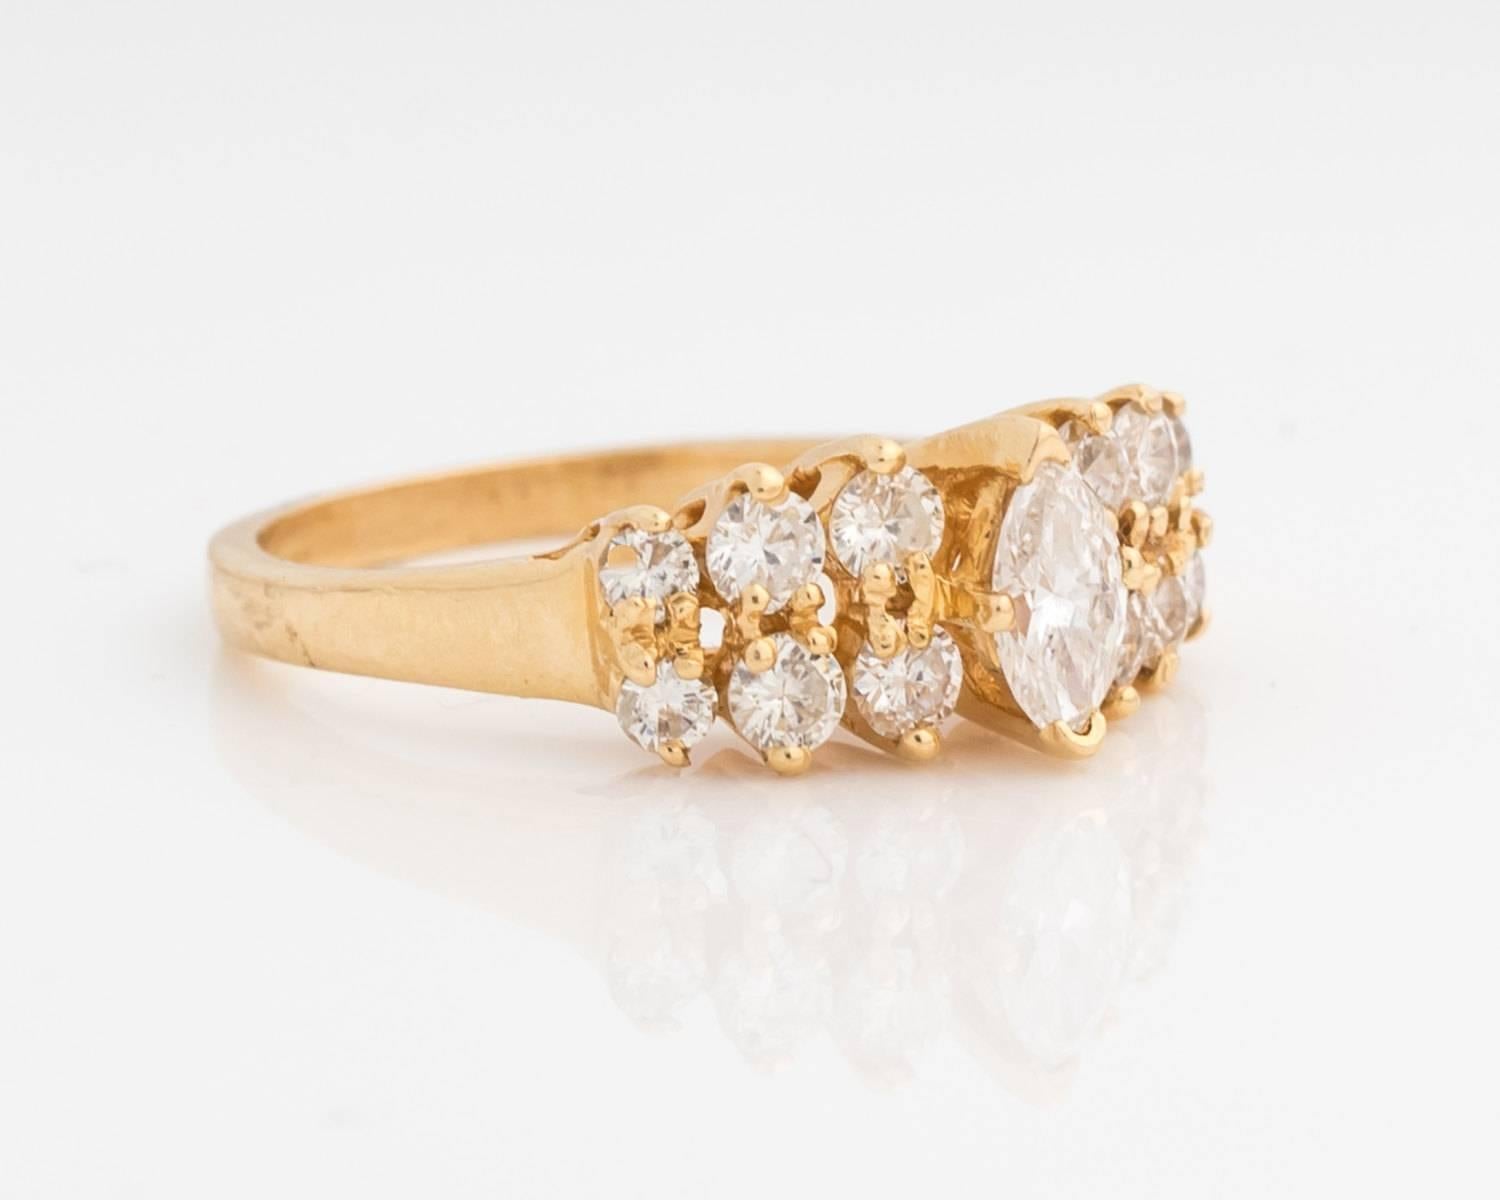 Gorgeous sparkling diamond ring band from the 1980s.
The natural diamonds are still in magnificent condition just like the rest of the ring! The center stone is a distinct marquise cut with six round brilliant stones on each side, for a total of 13